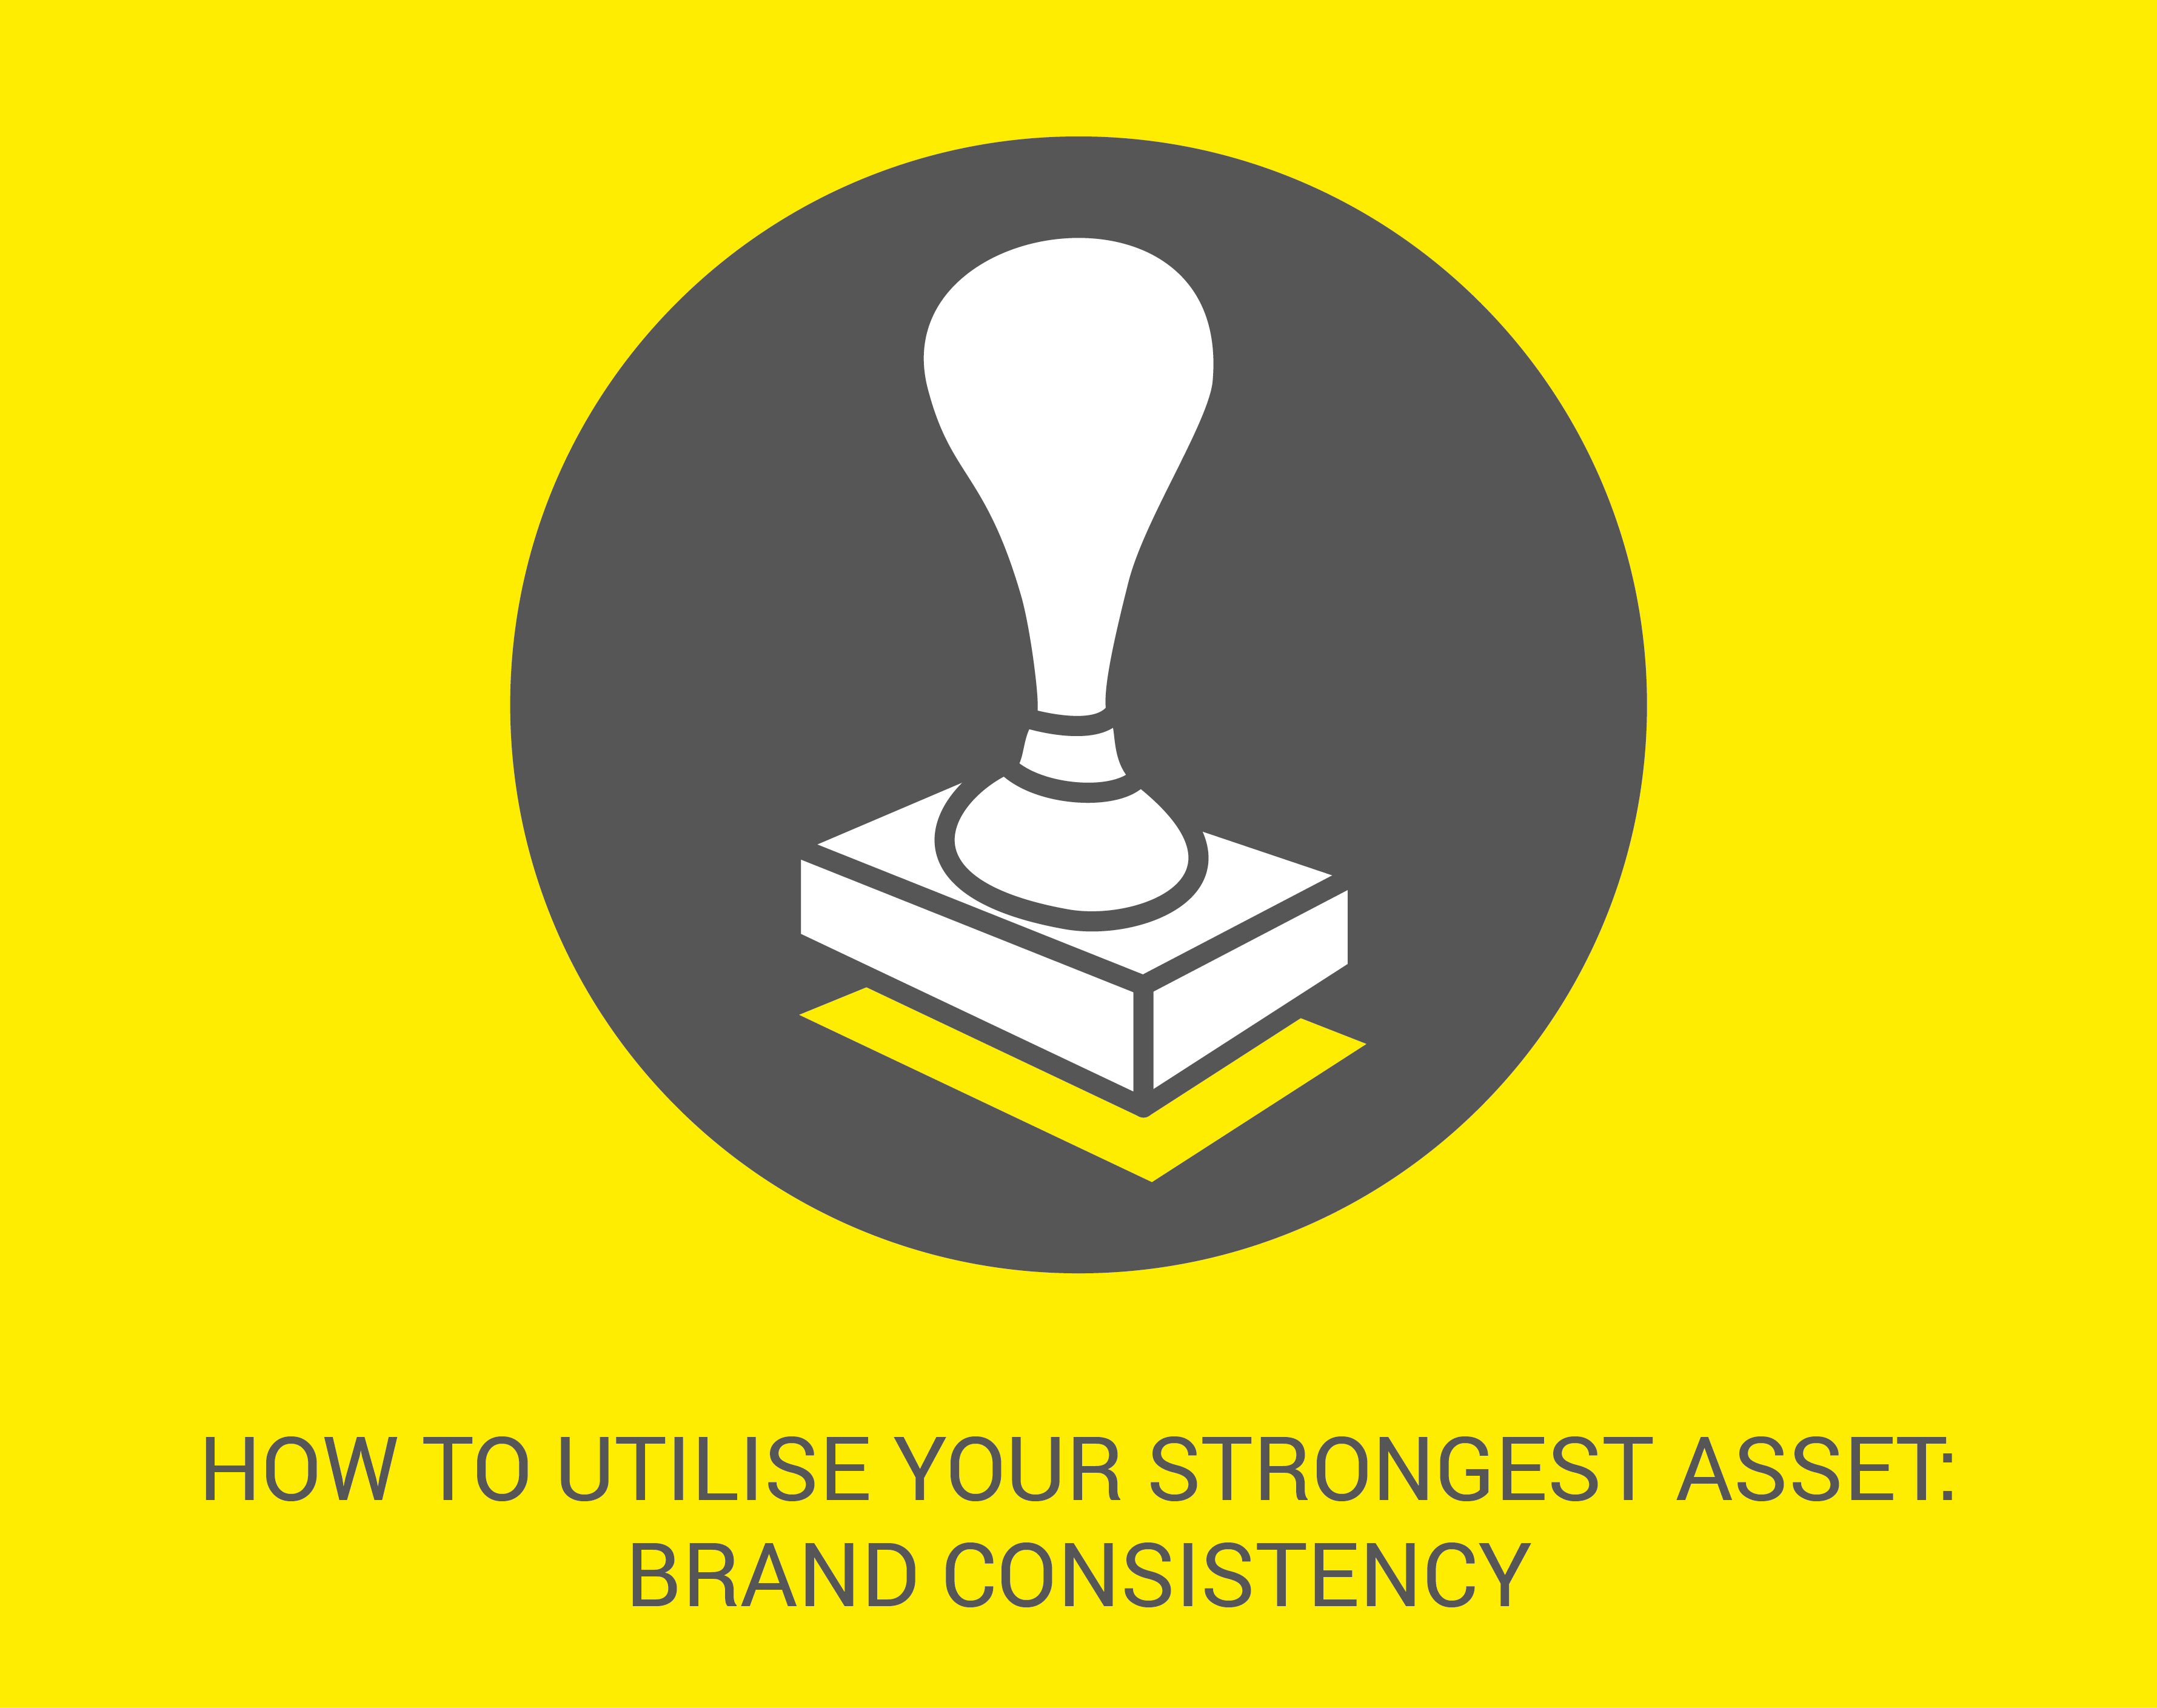 How to Utilise Your Strongest Asset - Brand Consistency